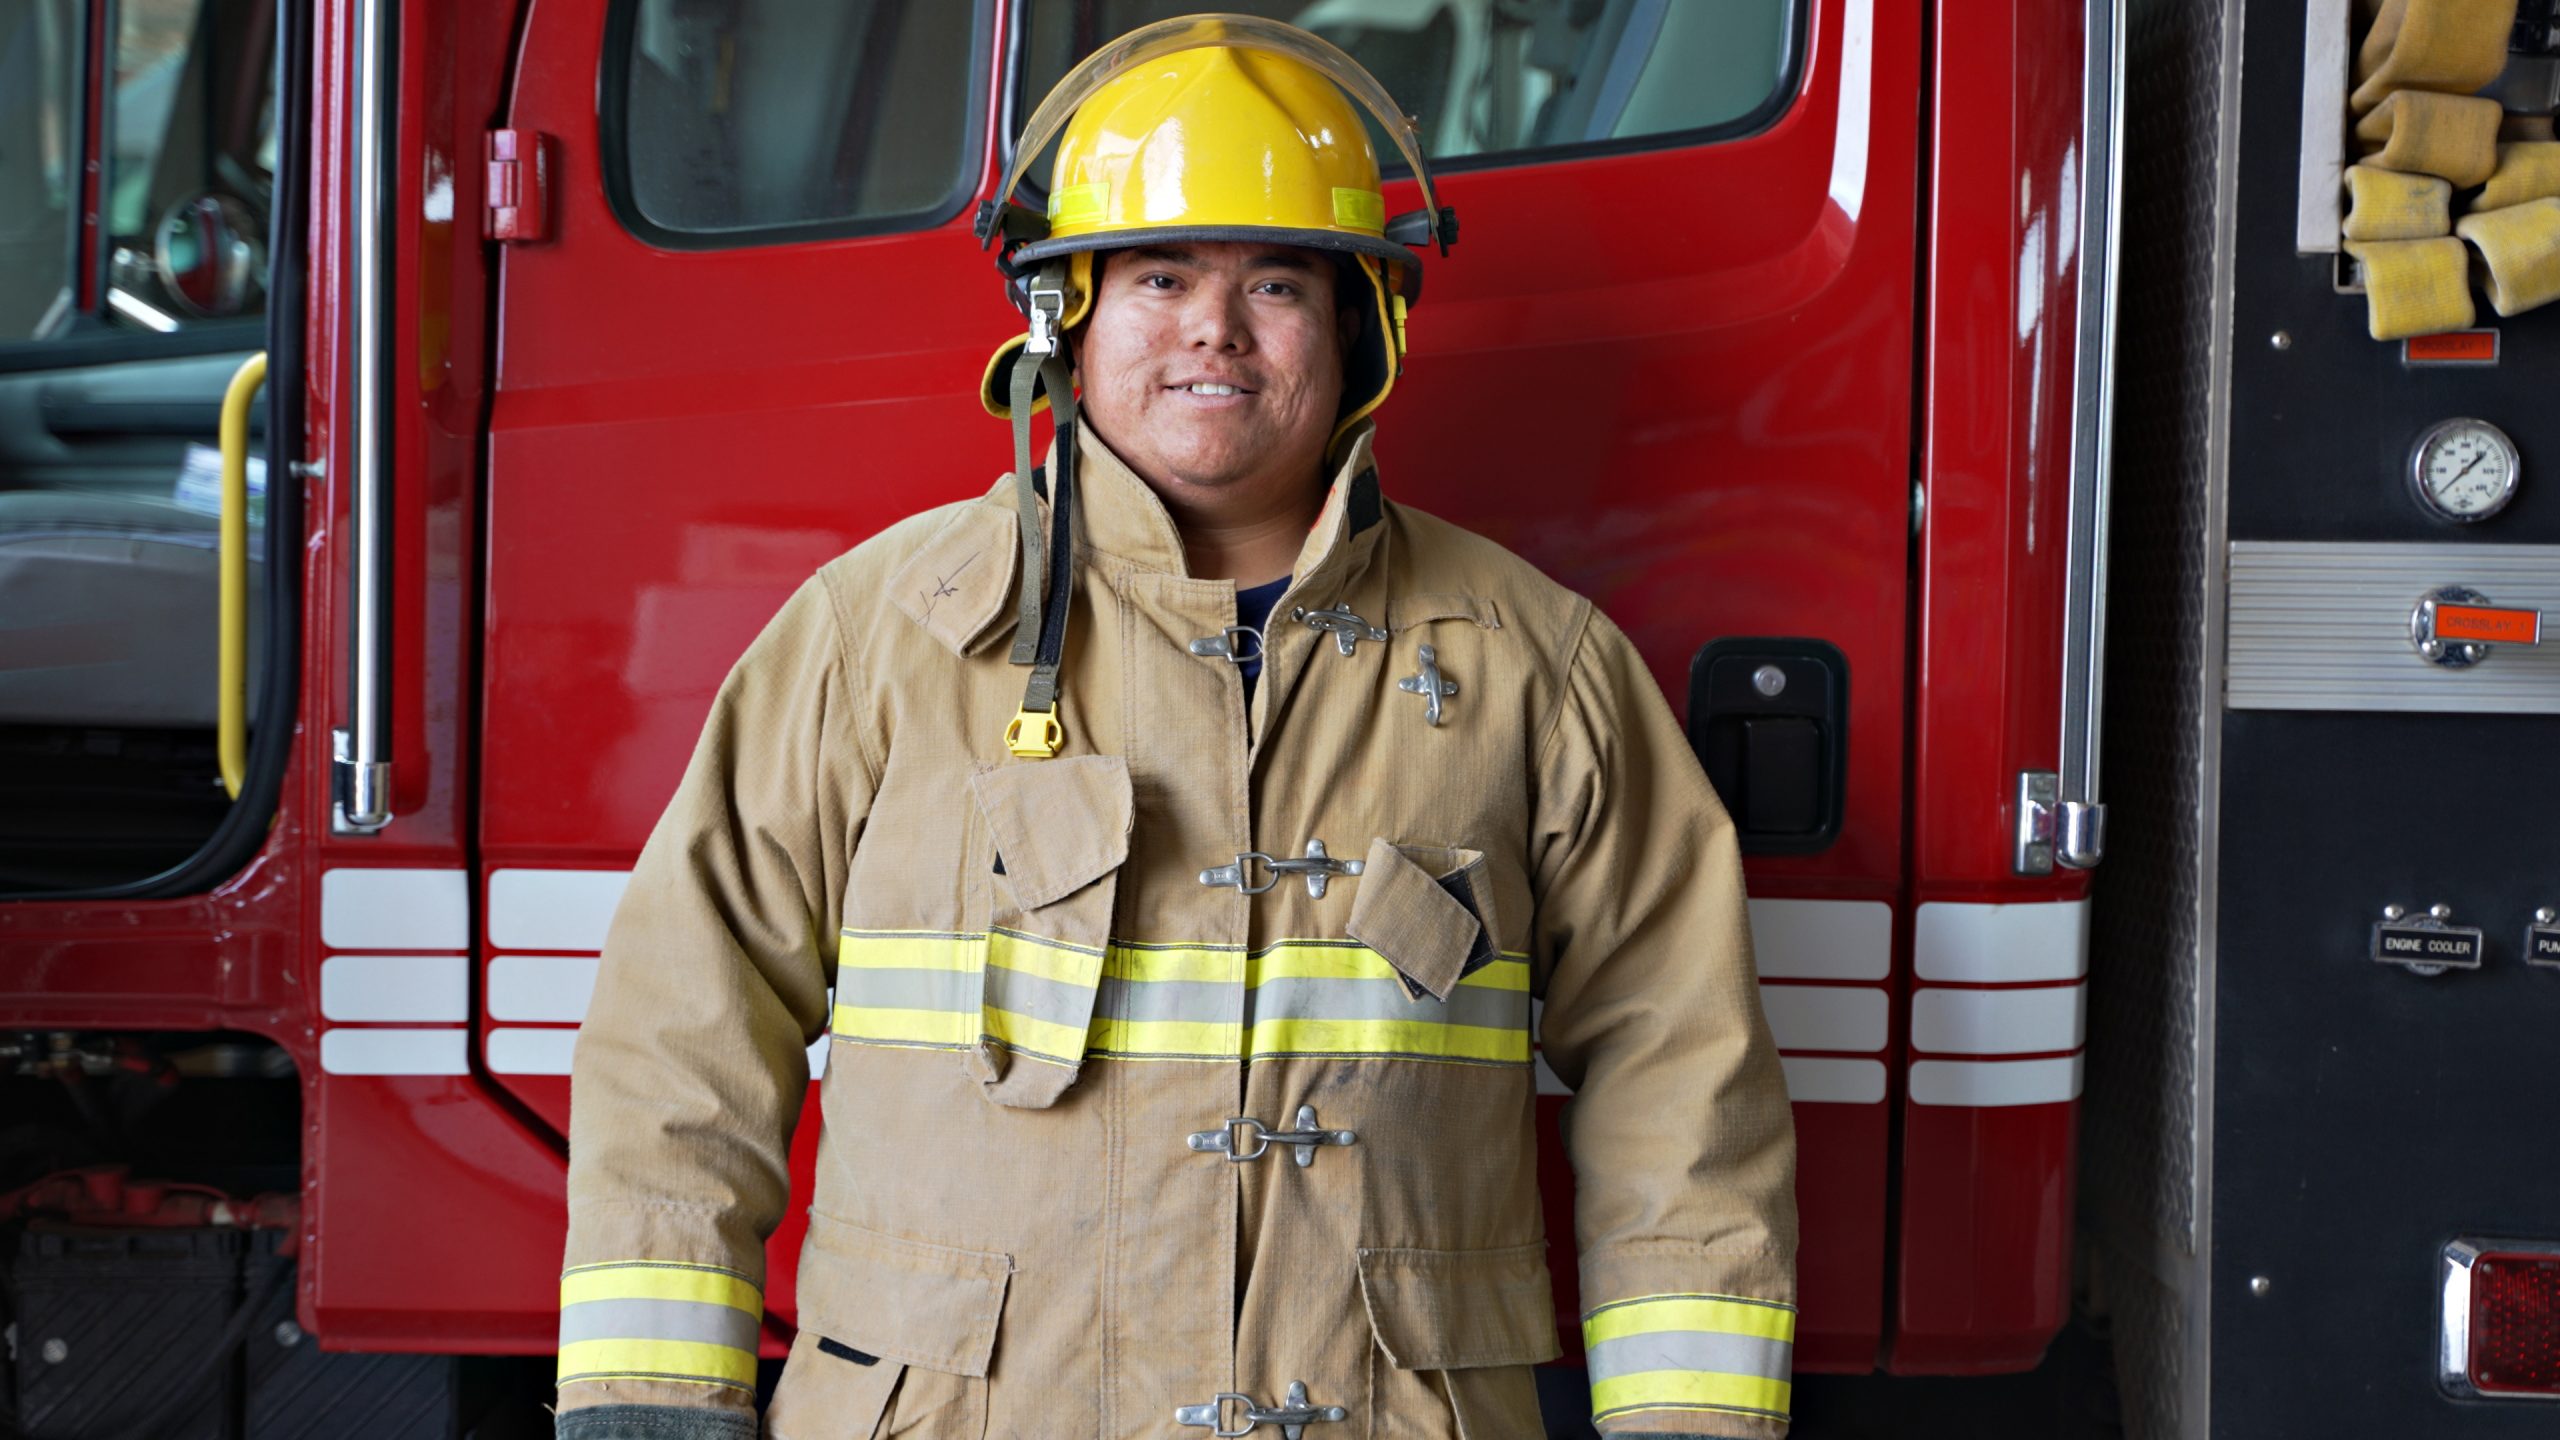 Indigenous Navajo Firefighter with protection suit standing in front of a fire engine truck